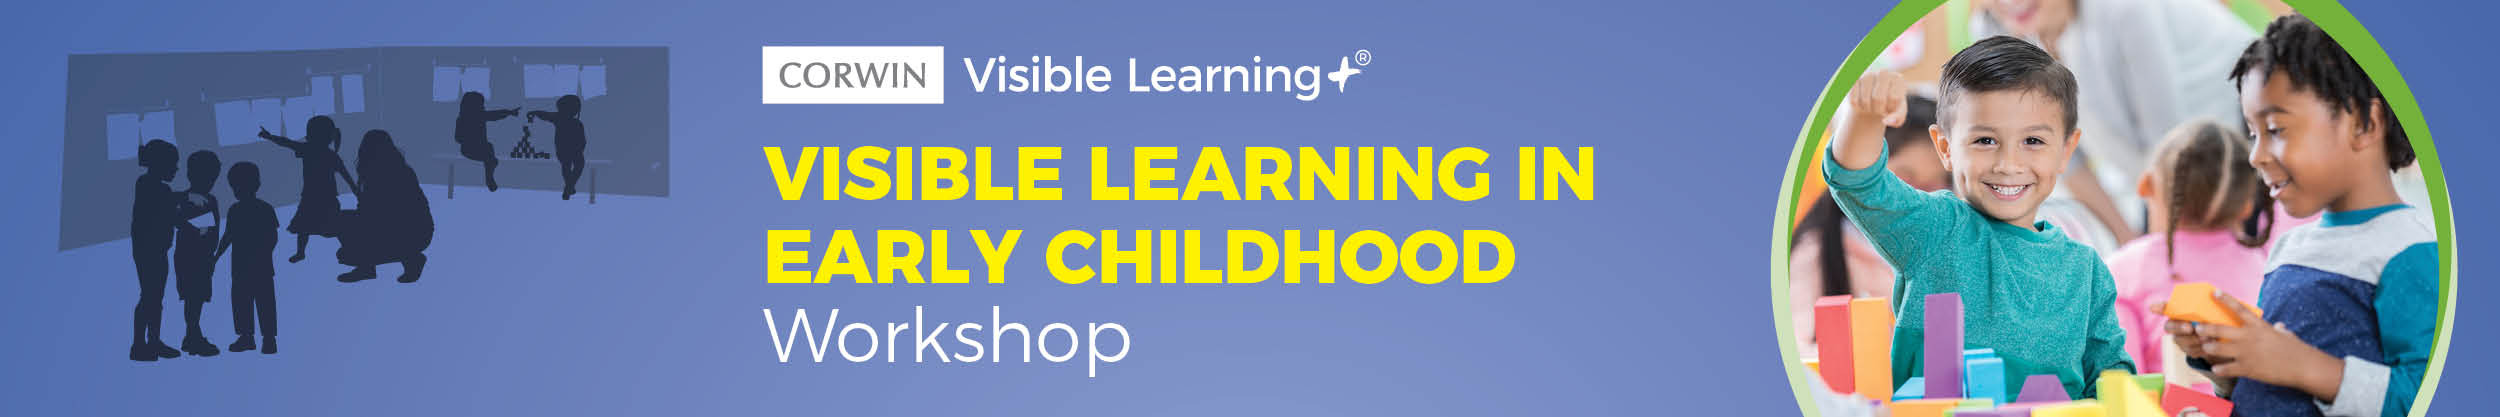 Visible Learning in Early Childhood Workshop